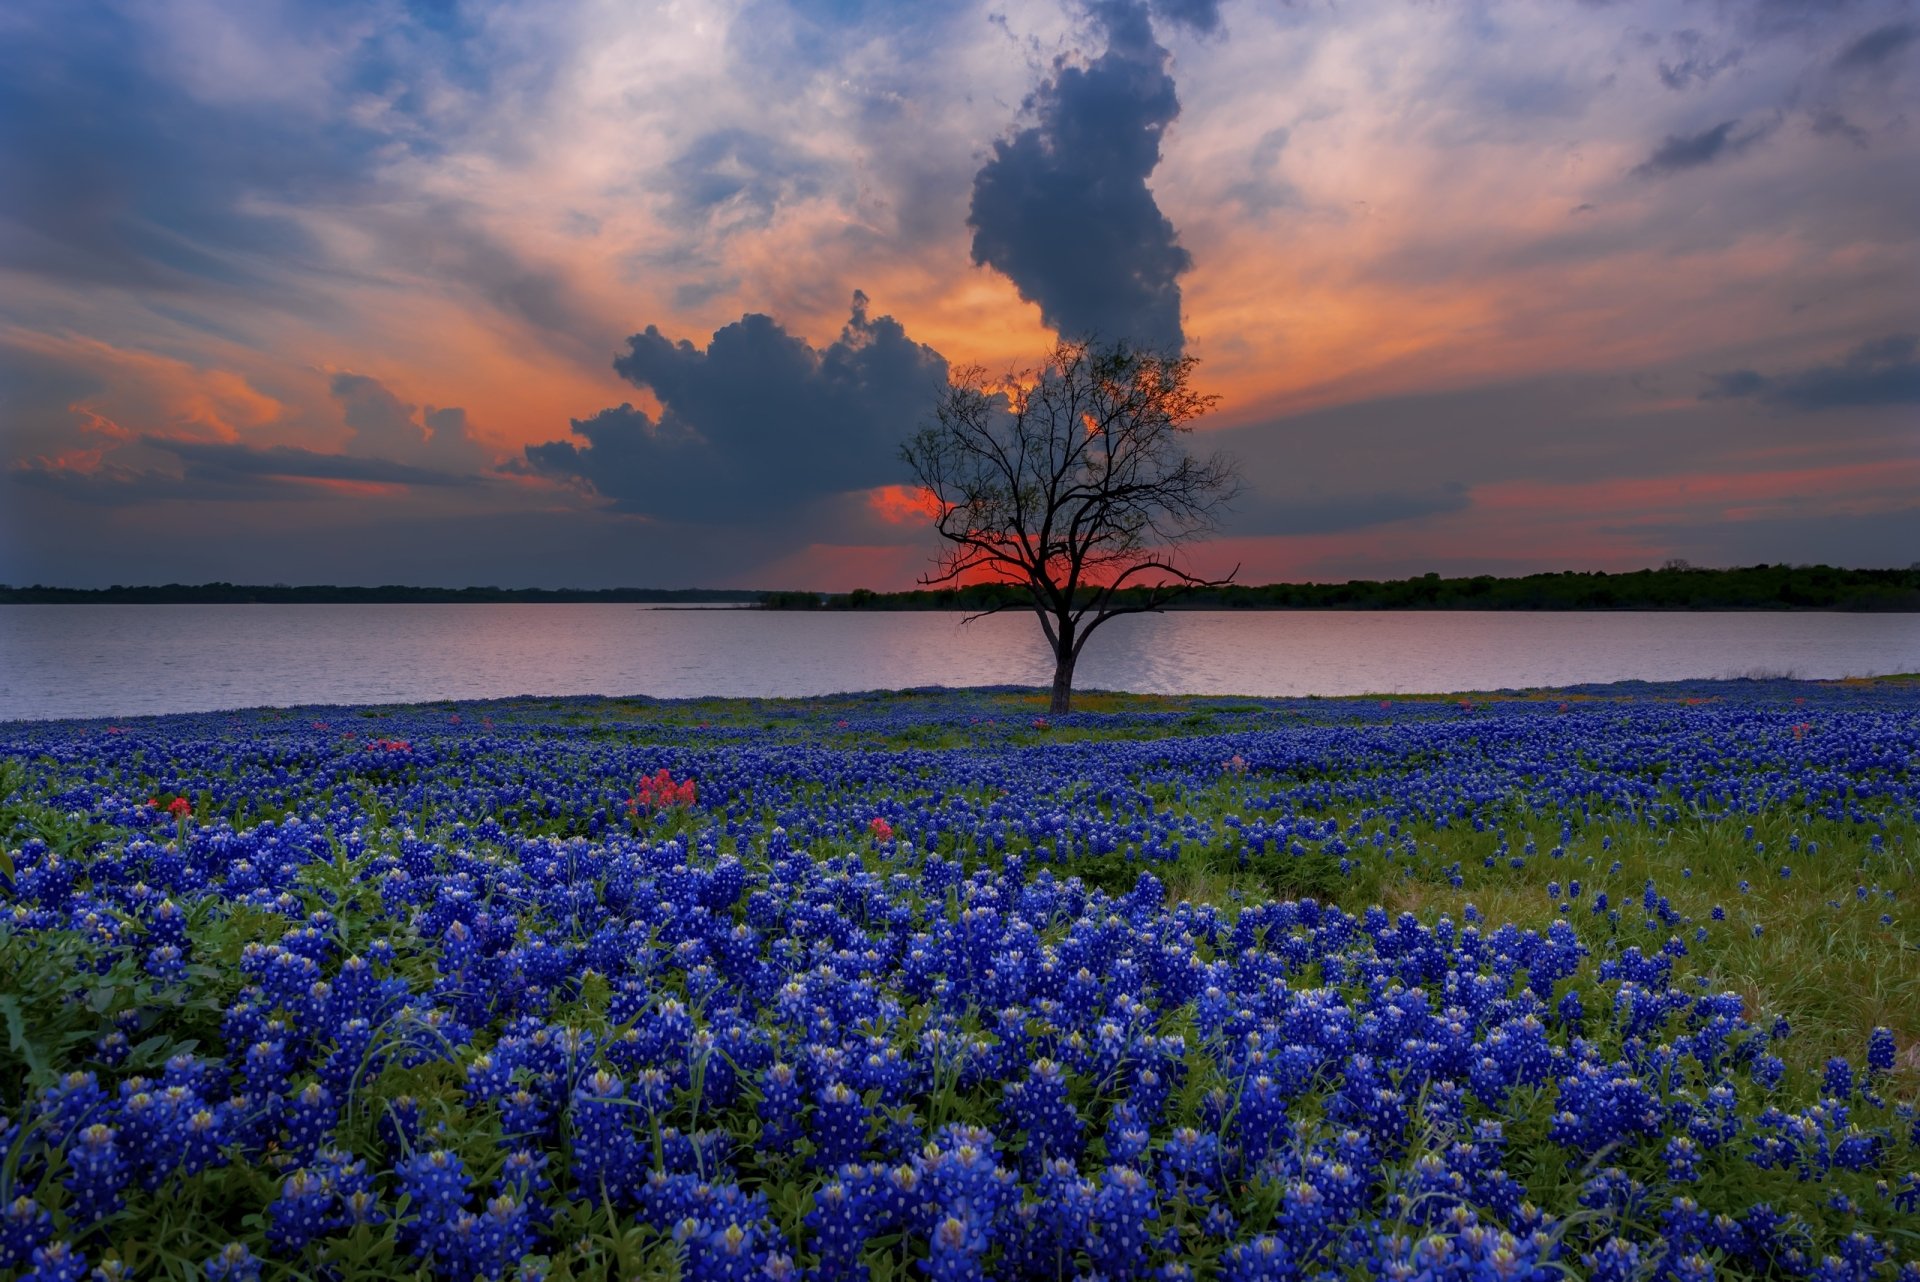 Vibrant Texas bluebonnets blooming under a clear sky with fluffy clouds, creating a picturesque nature scene for a desktop wallpaper.